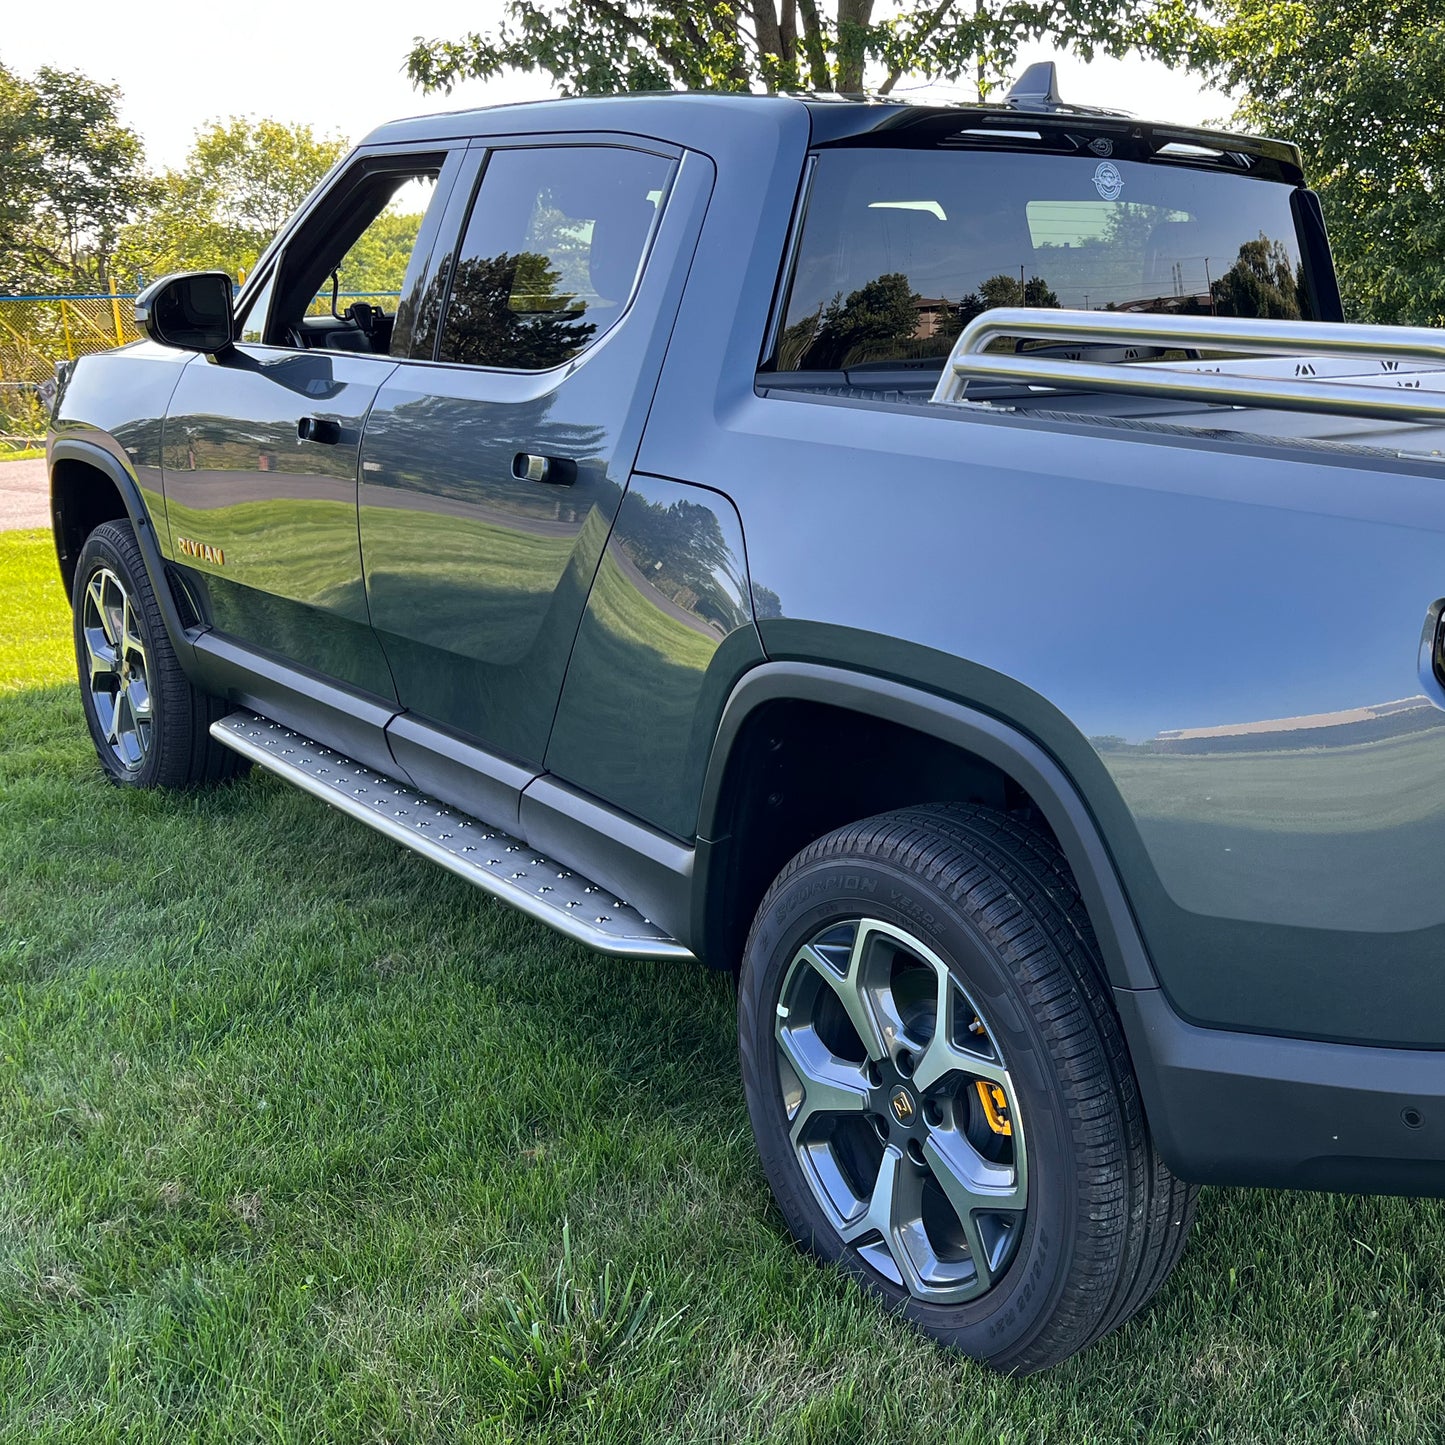 Rivian SUV (R1S) / Truck (R1T) Stainless Steel Running Boards